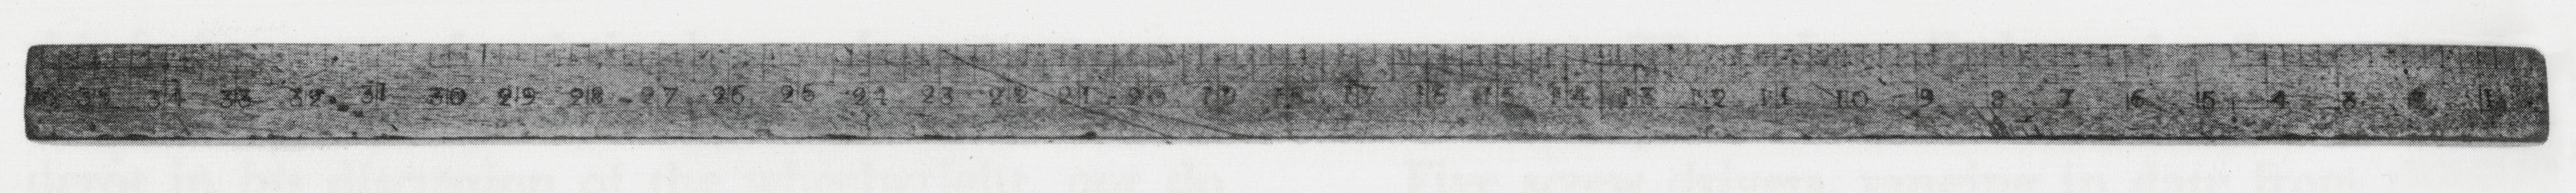 Black and white photograph of a yardstick.